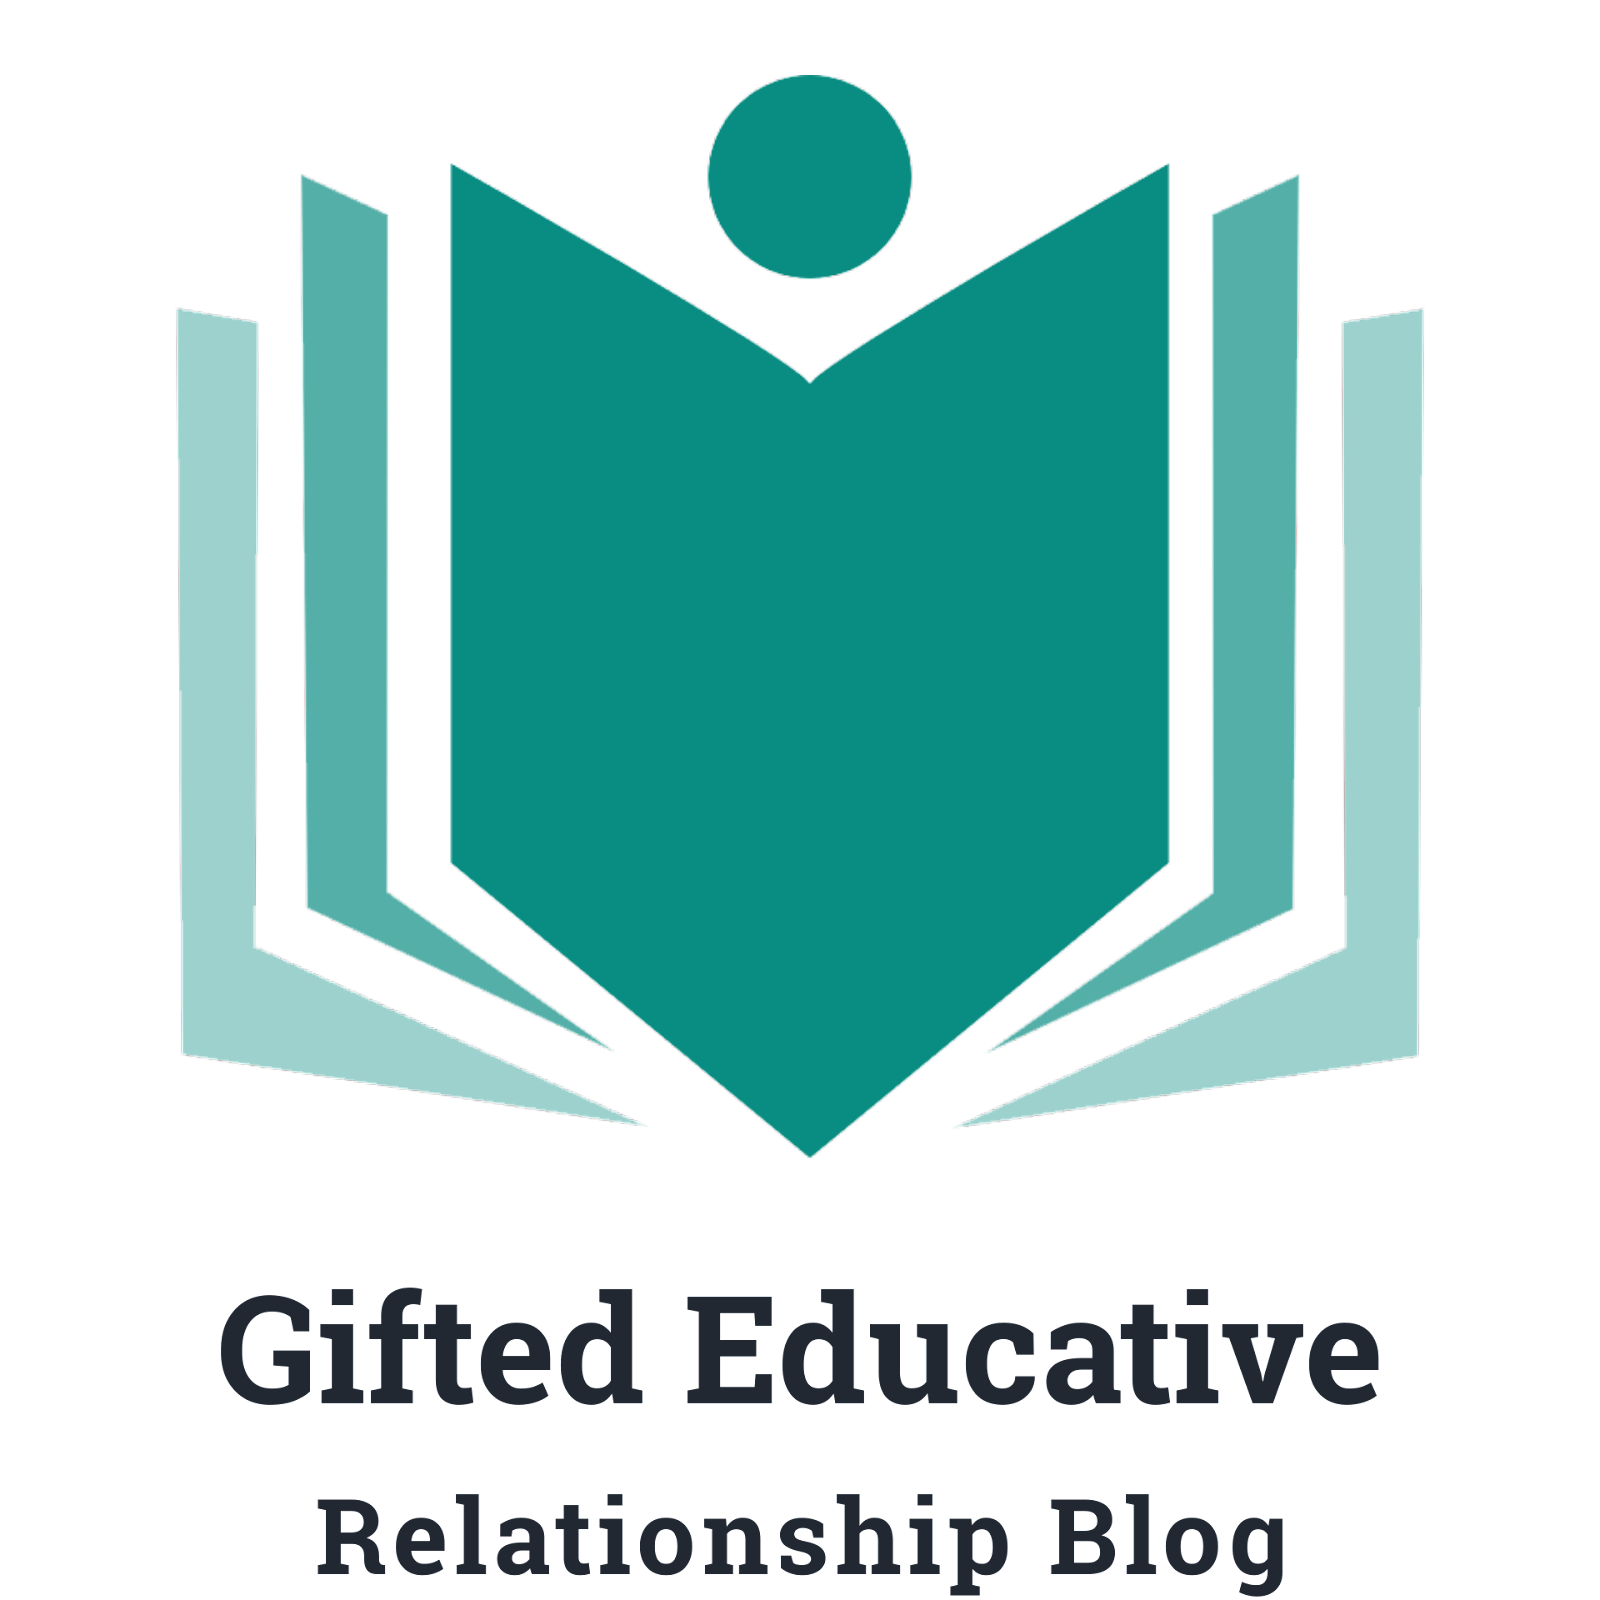 Gifted Educative Relationship Blog - Building A Good And Healthy Relationship